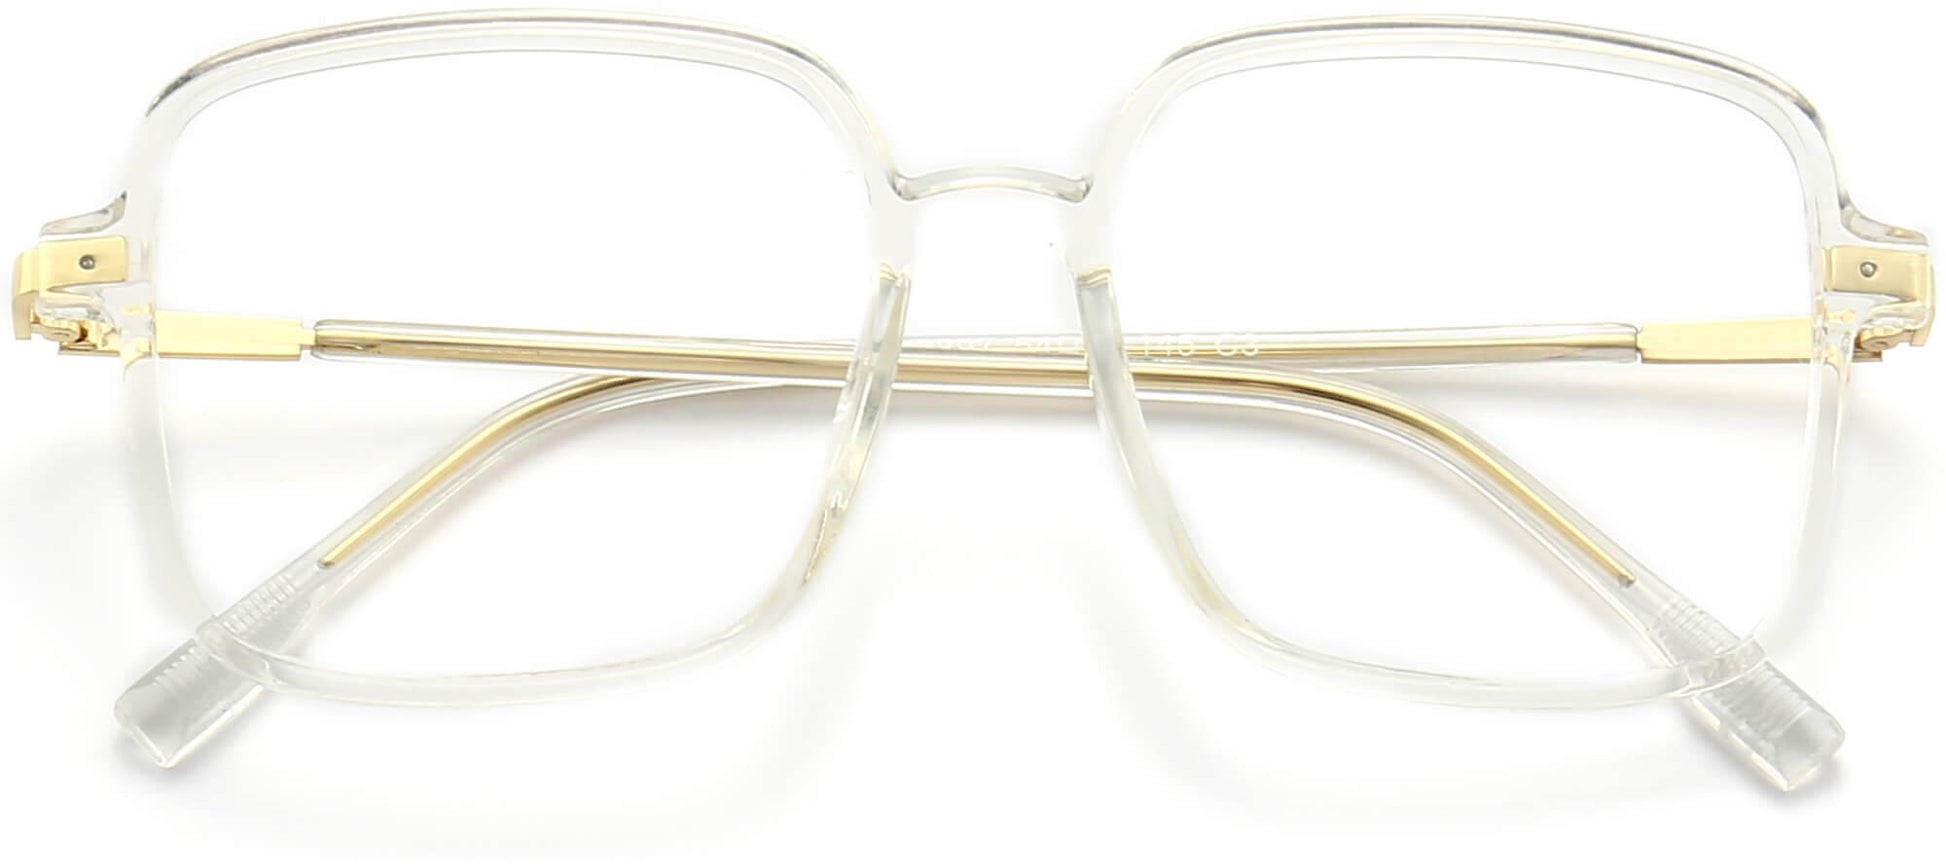 Amara Square Clear Eyeglasses from ANRRI, closed view